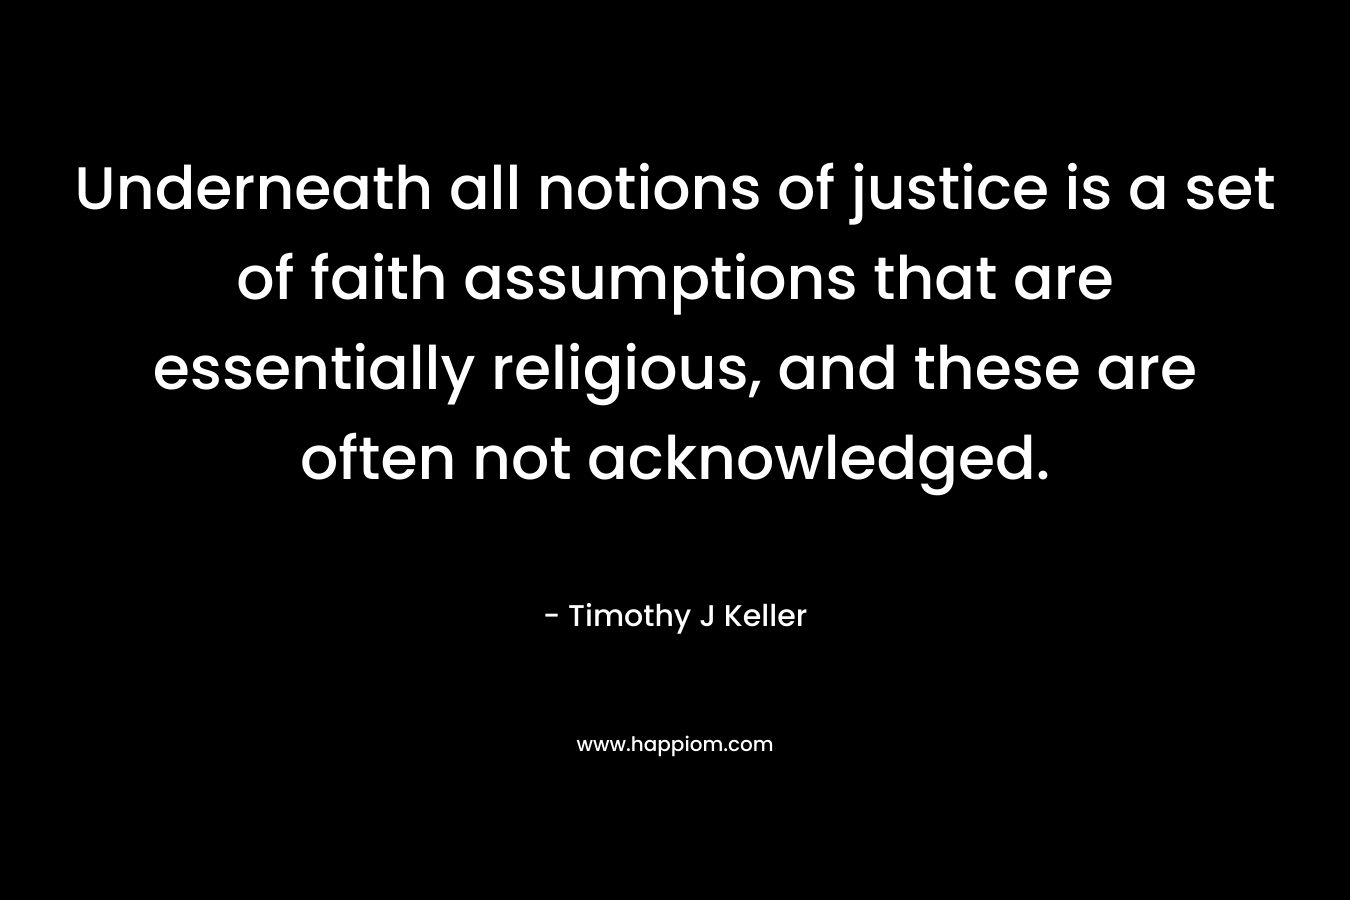 Underneath all notions of justice is a set of faith assumptions that are essentially religious, and these are often not acknowledged. – Timothy J Keller